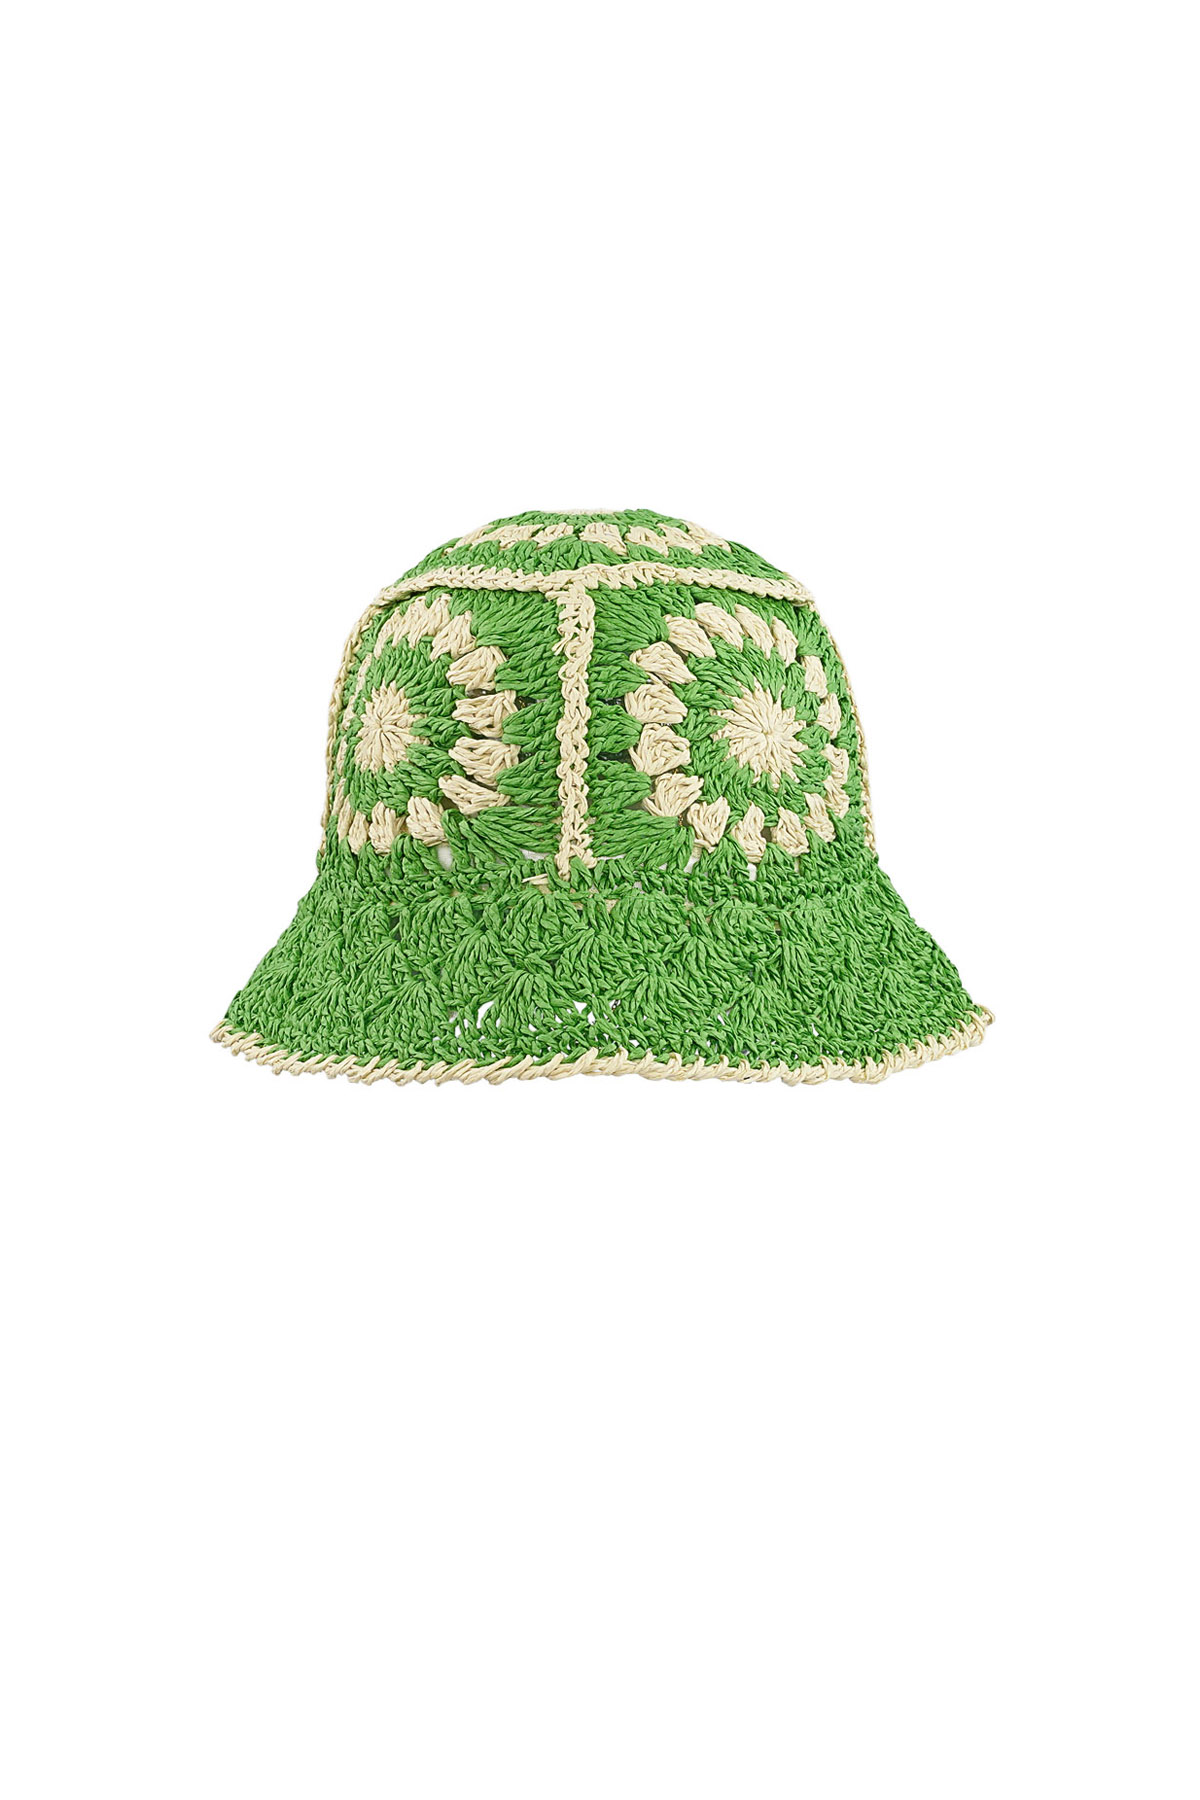 Crochet hat with flowers - green h5 